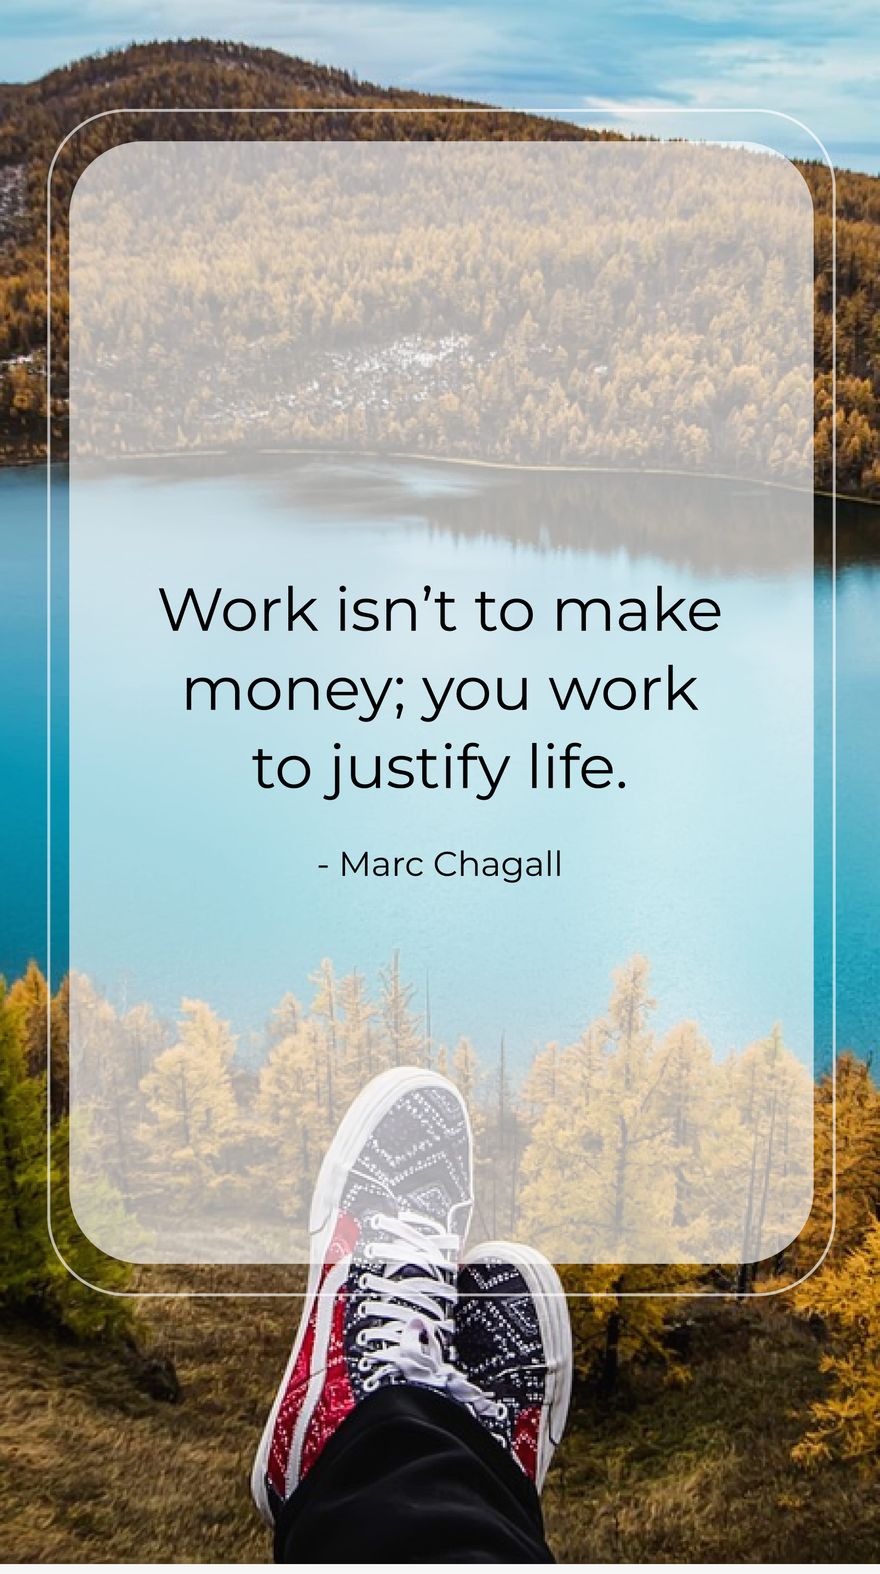 Marc Chagall - Work isn’t to make money; you work to justify life. Template